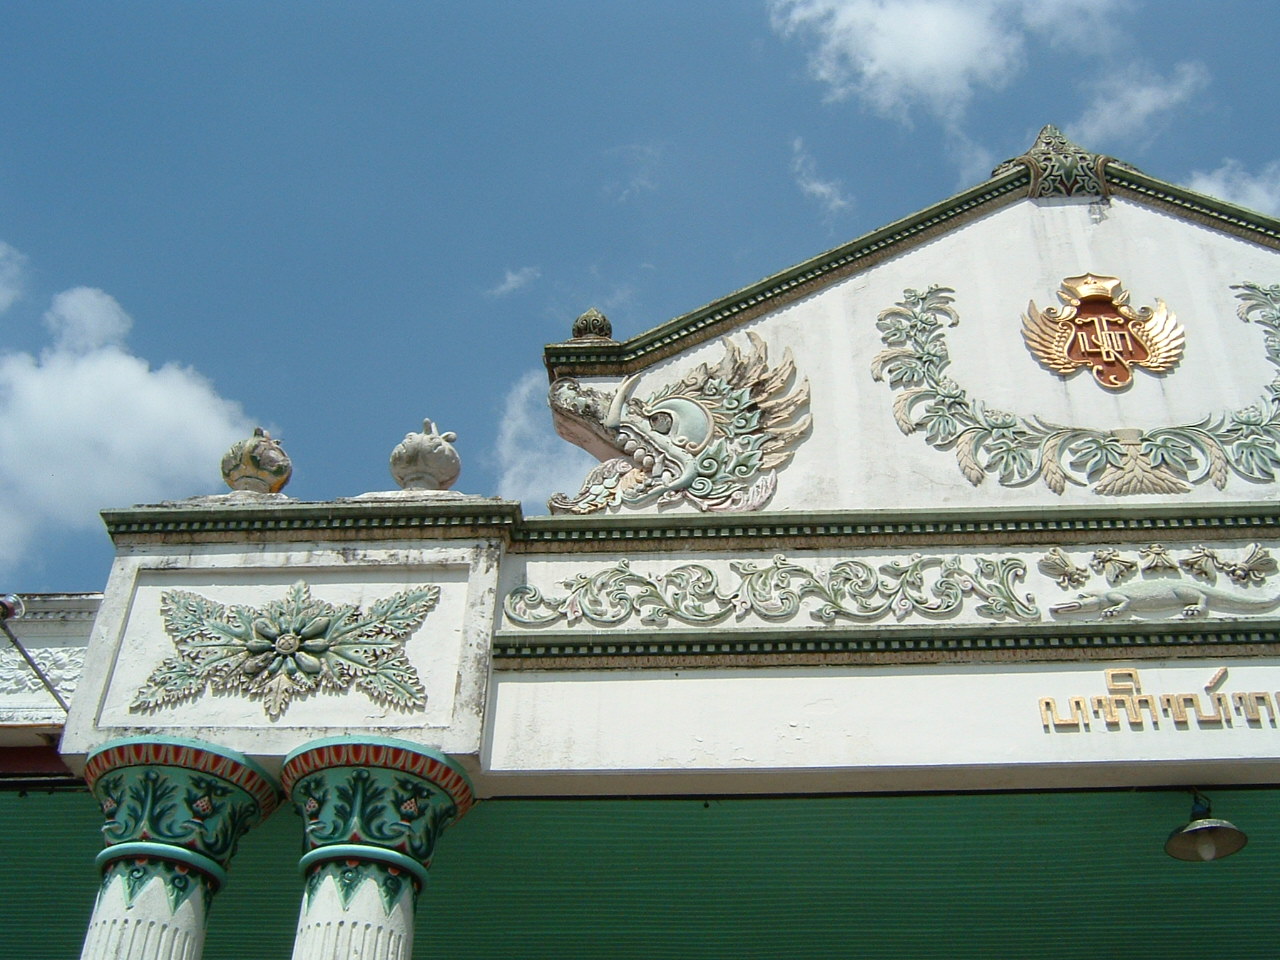 View looking south showing detail of the gable crowning the gate to the Pagelaran Pavilion